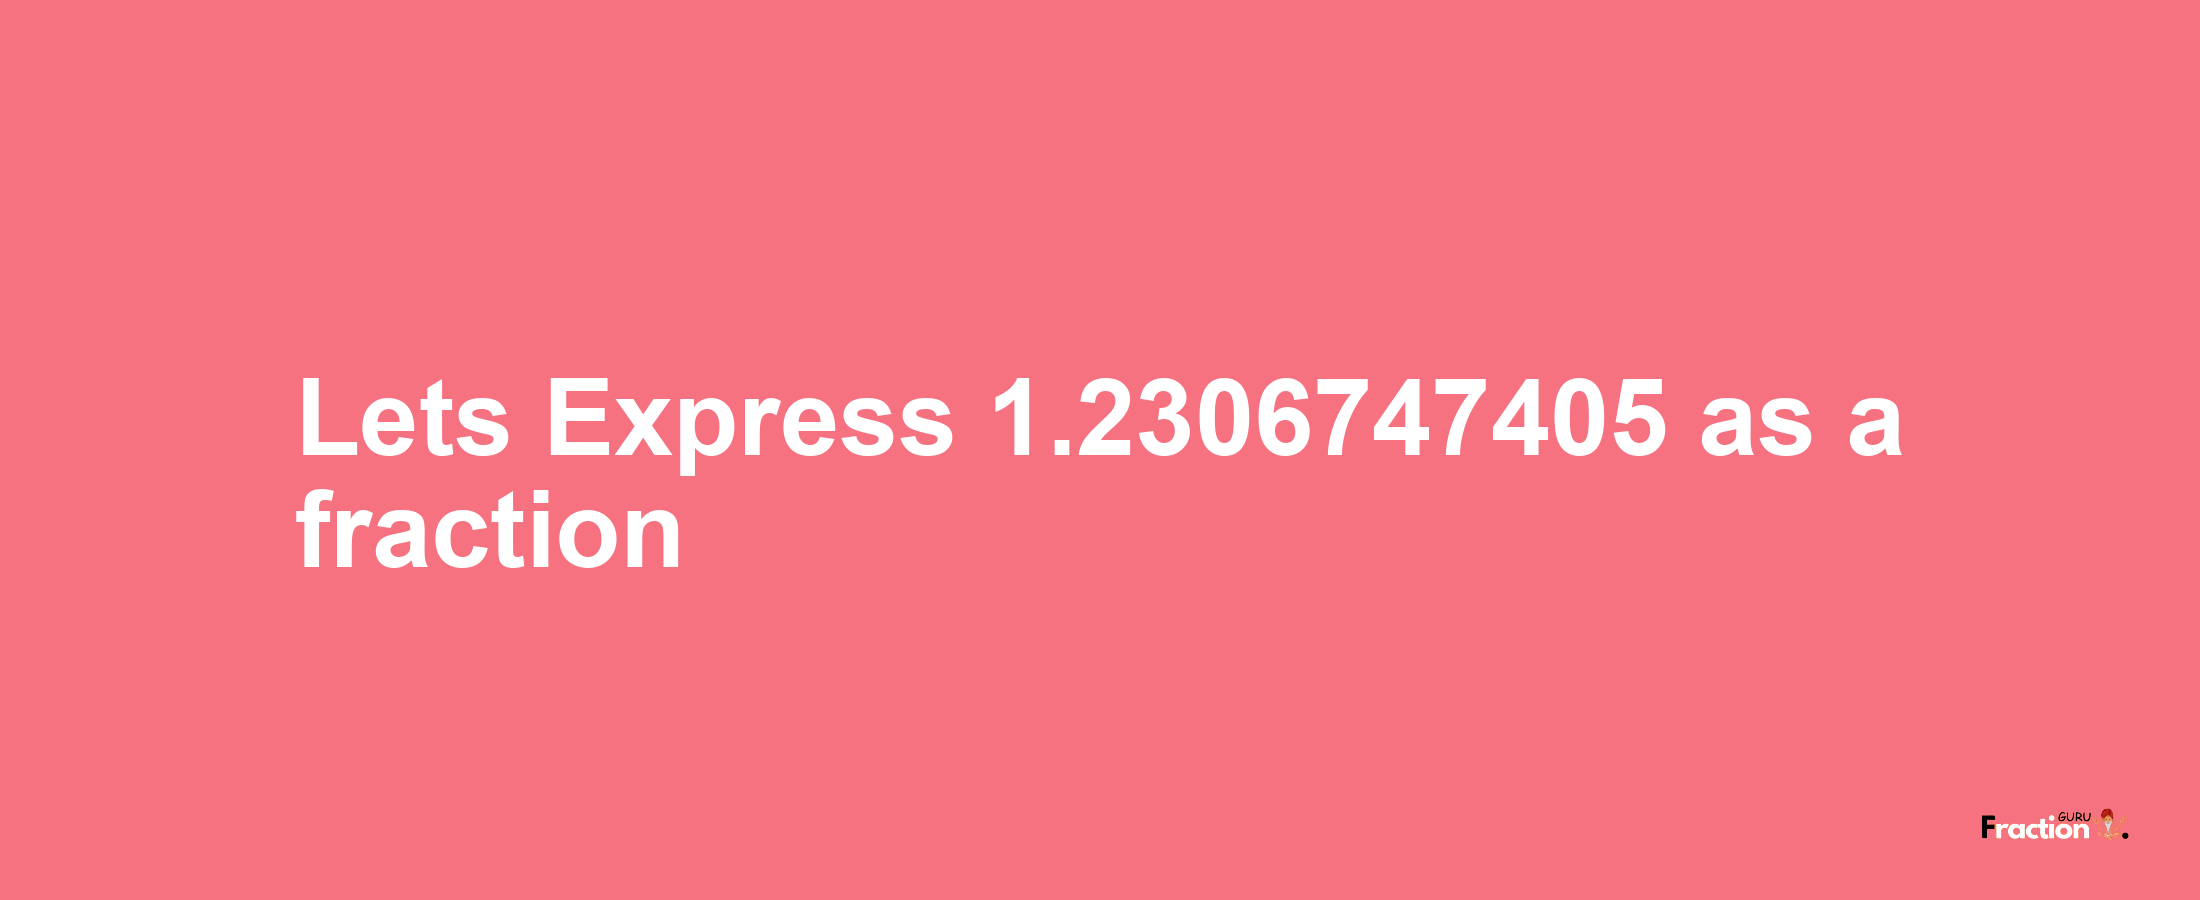 Lets Express 1.2306747405 as afraction